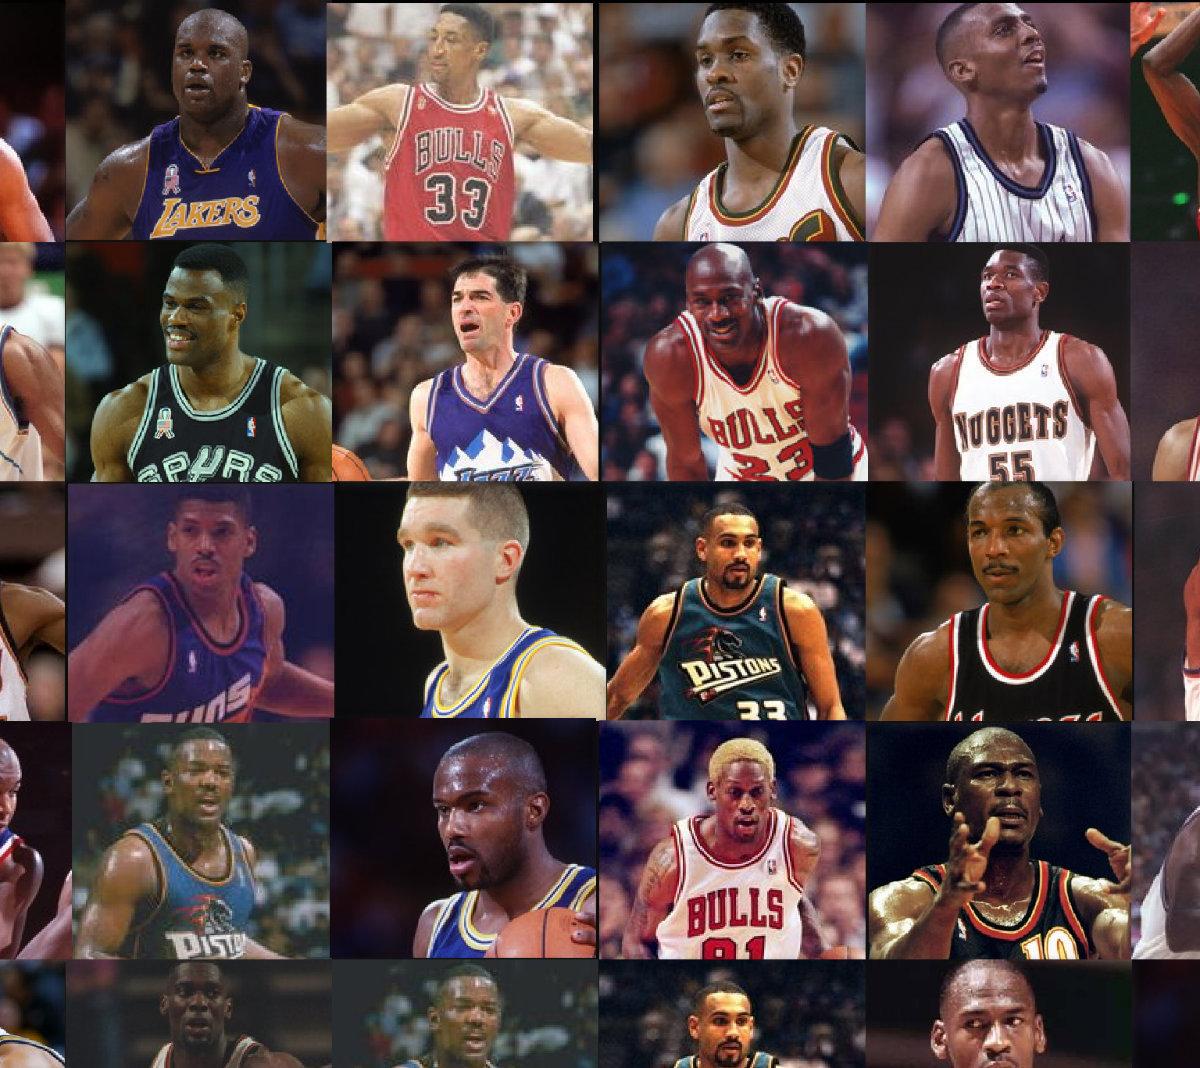 Who scored the most points in the NBA in the 1980s?